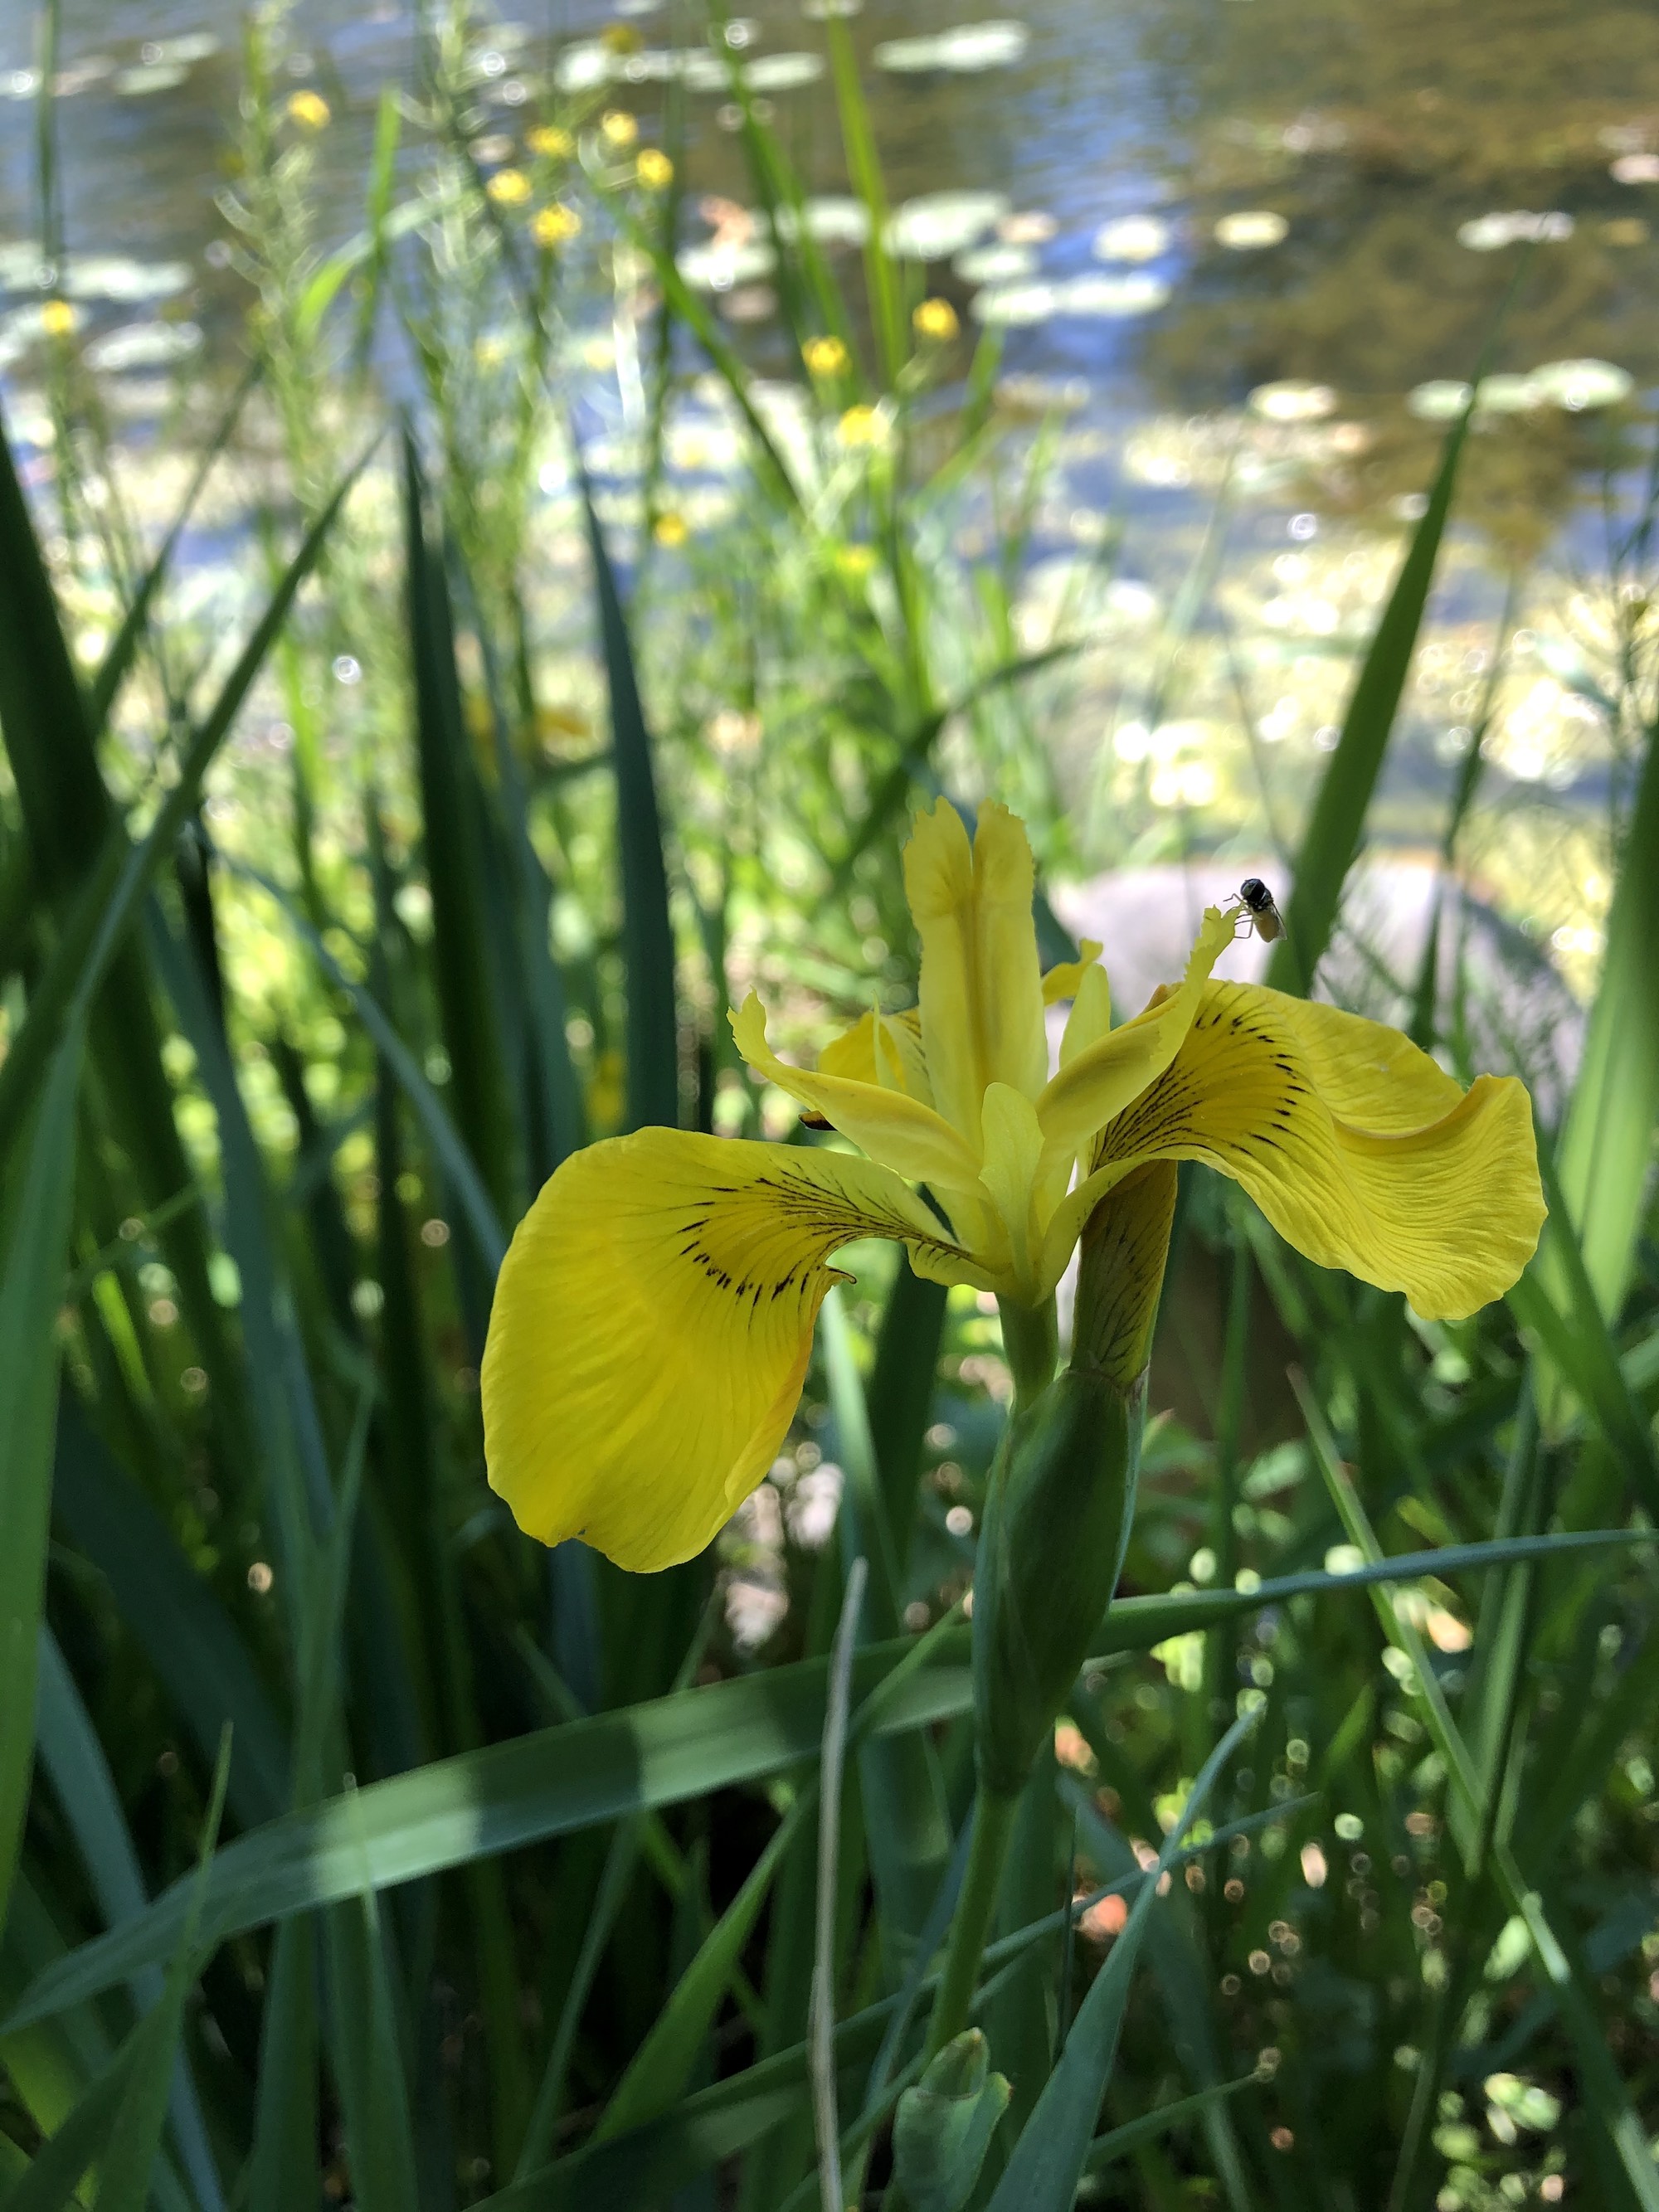 Yellow Flag Iris on east shore of Lake Wingra in Vilas Park  on May 29, 2021.